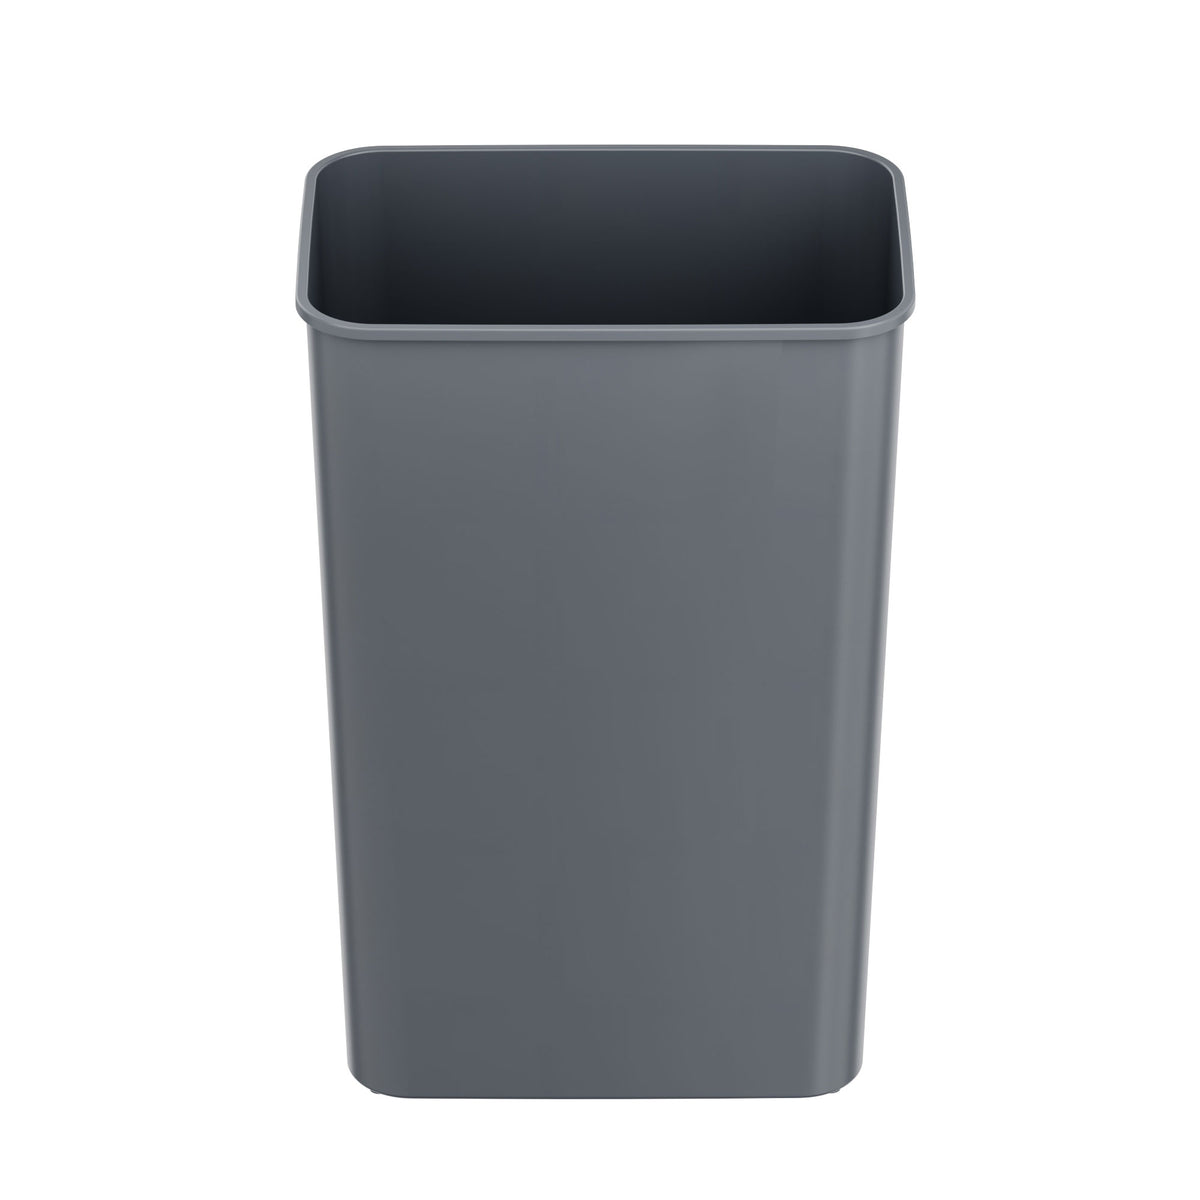 Trash Can Body for SP13GG Model